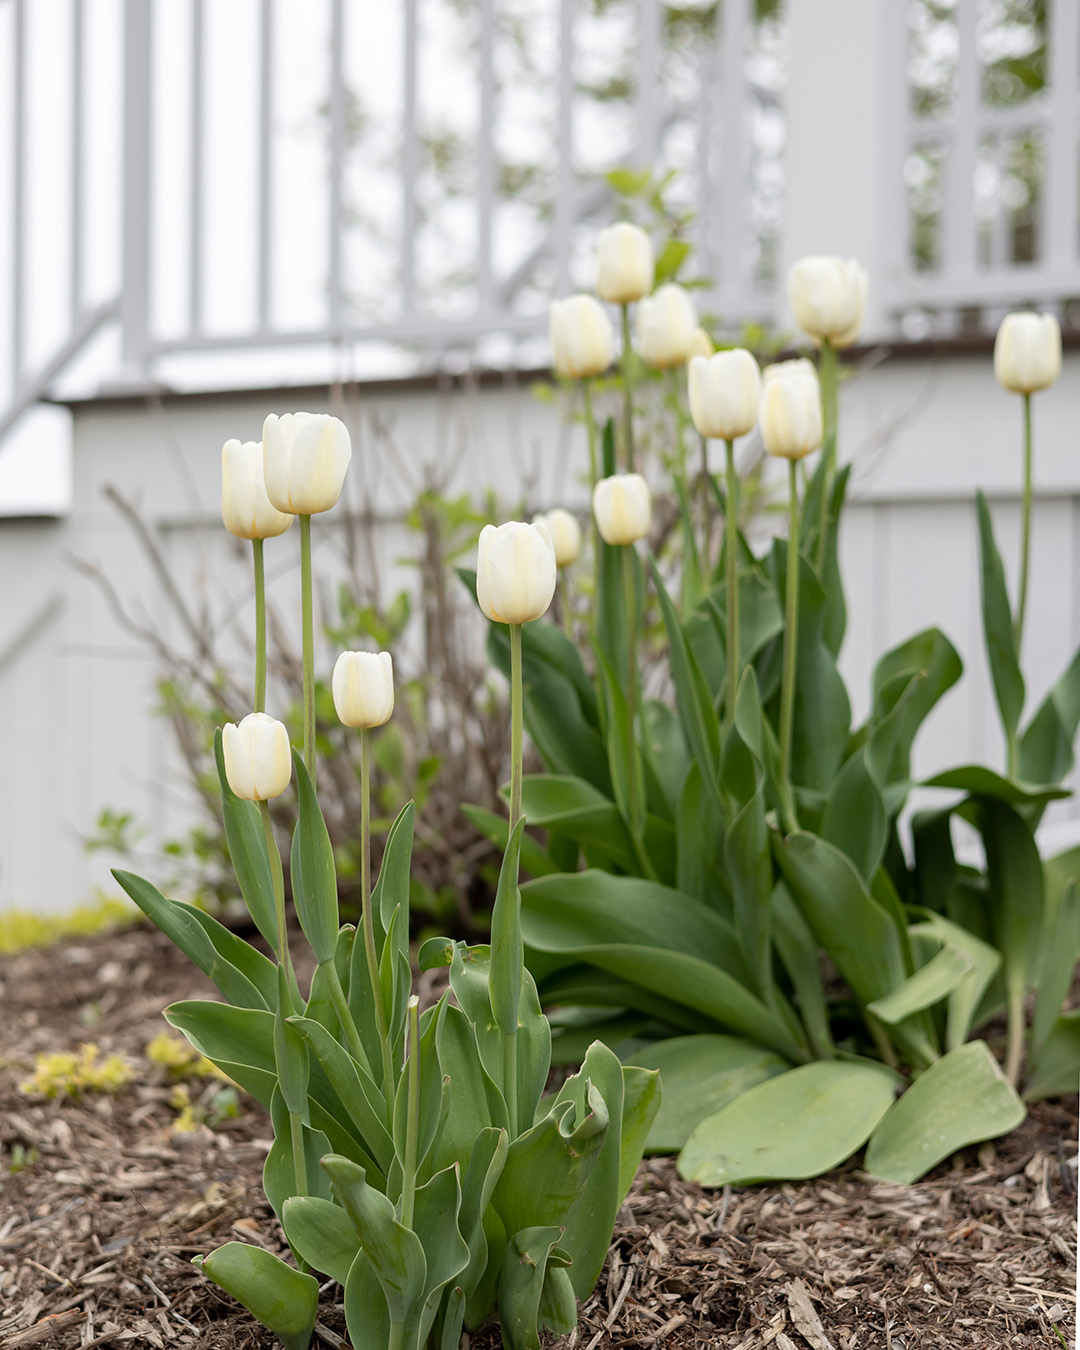 Every garden deserves a little early spring cheer and adding spring bulbs is an easy way to do it. Here's how to grow tulips!